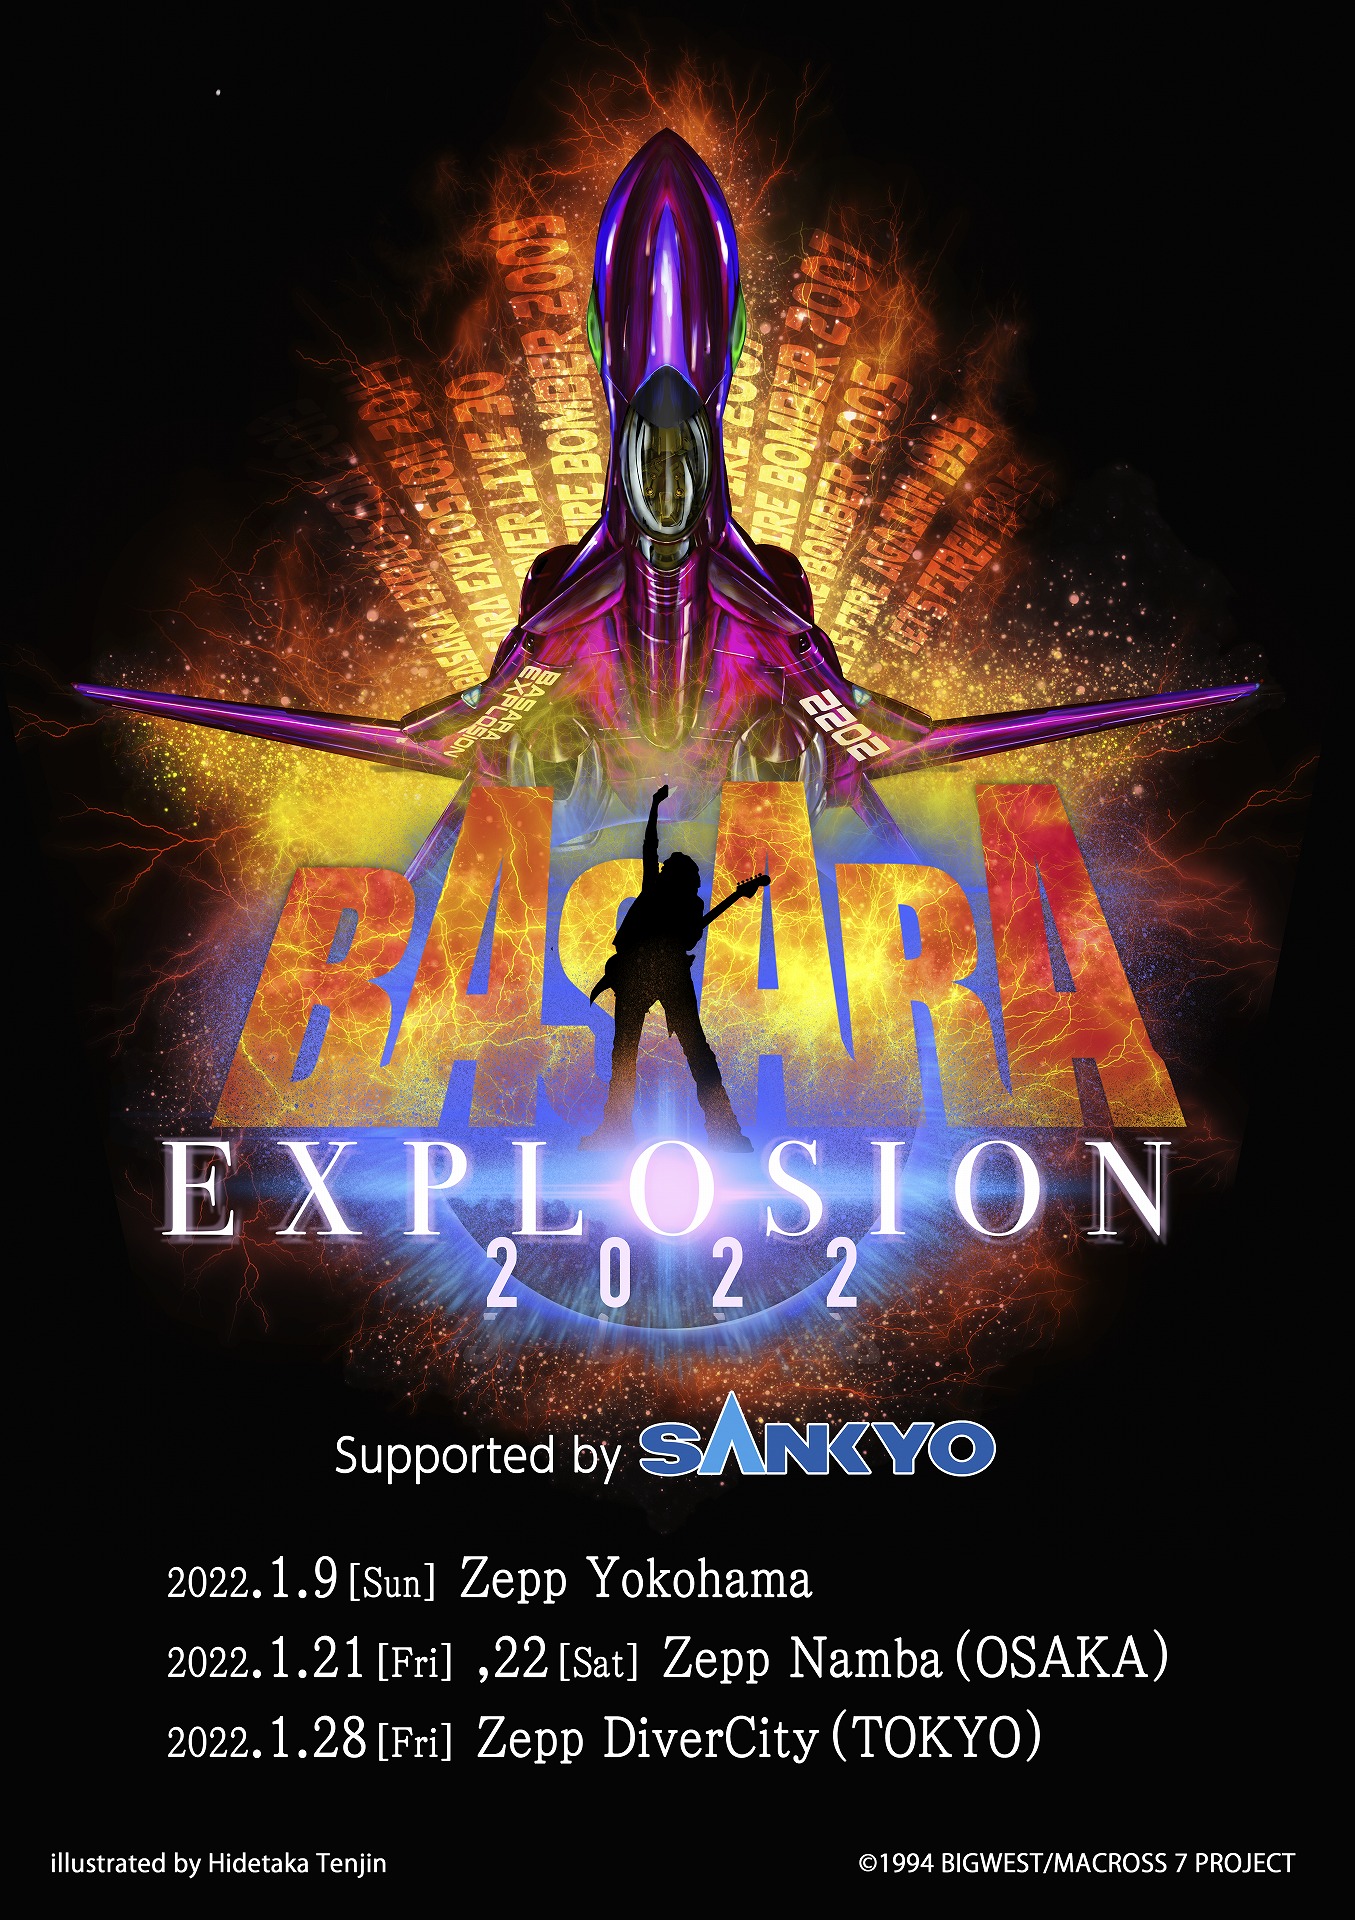 [Streaming+] MACROSS 7 BASARA EXPLOSION 2022 from FIRE BOMBER Supported by SANKYO